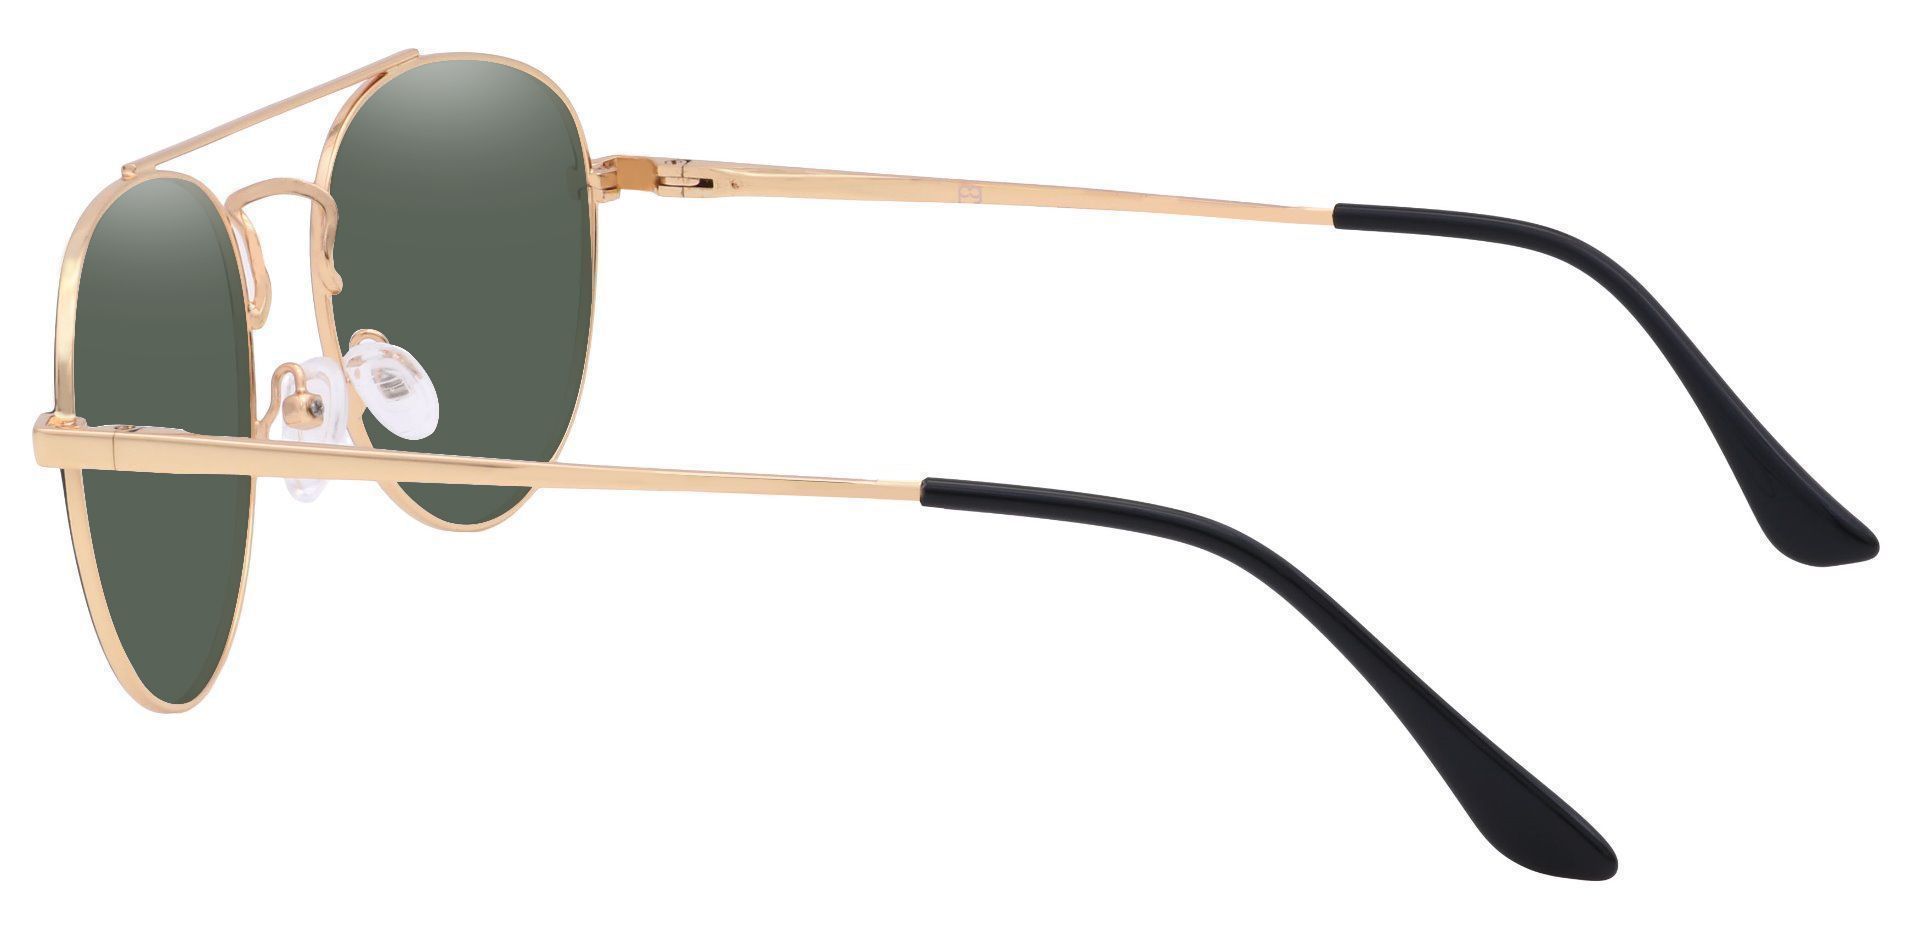 Trapp Aviator Lined Bifocal Sunglasses - Gold Frame With Green Lenses